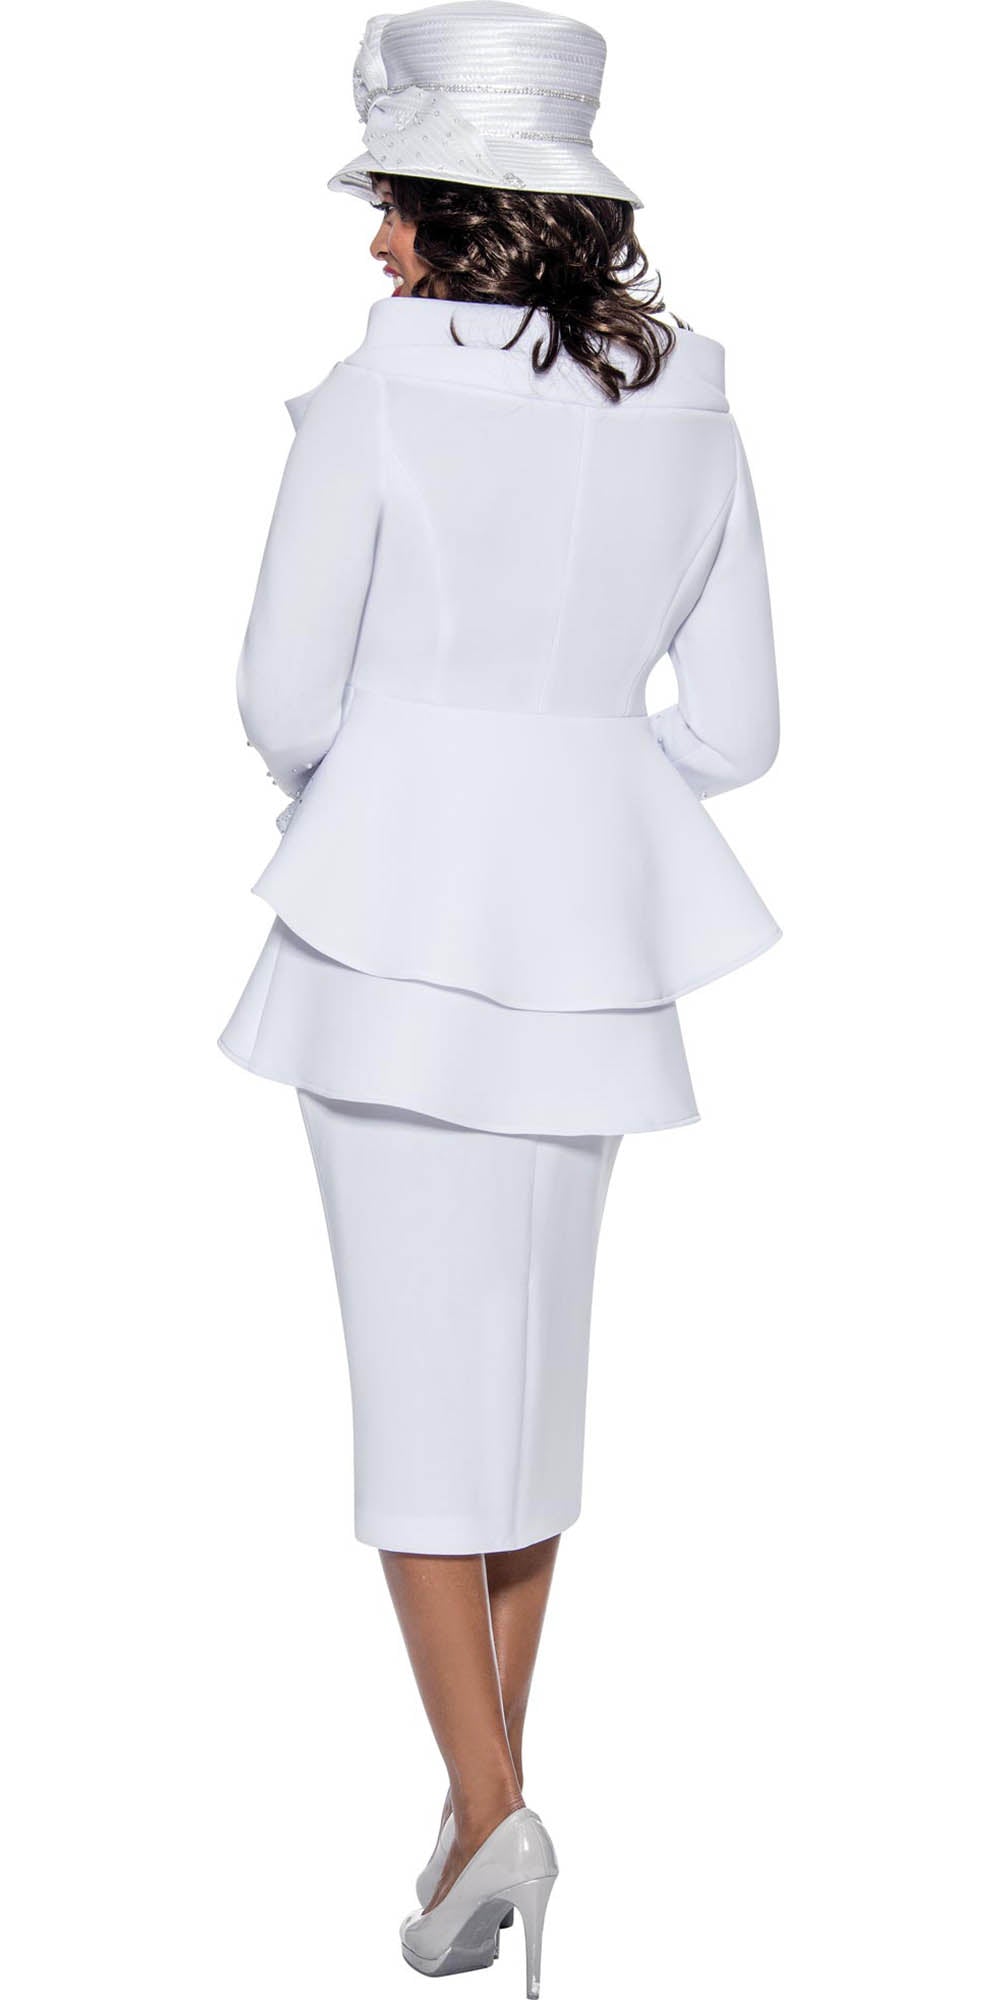 GMI G8982 - White - Bead and Gem Embellished Layered Peplum Womens Church Suit